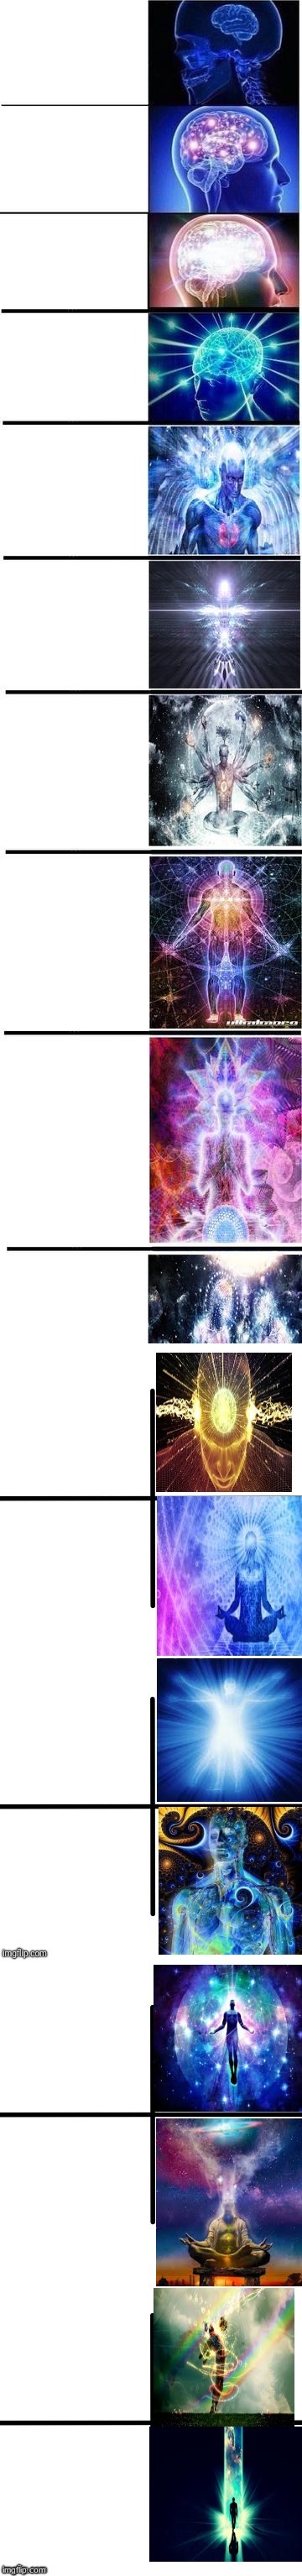 image tagged in expanding brain 18 panel | made w/ Imgflip meme maker